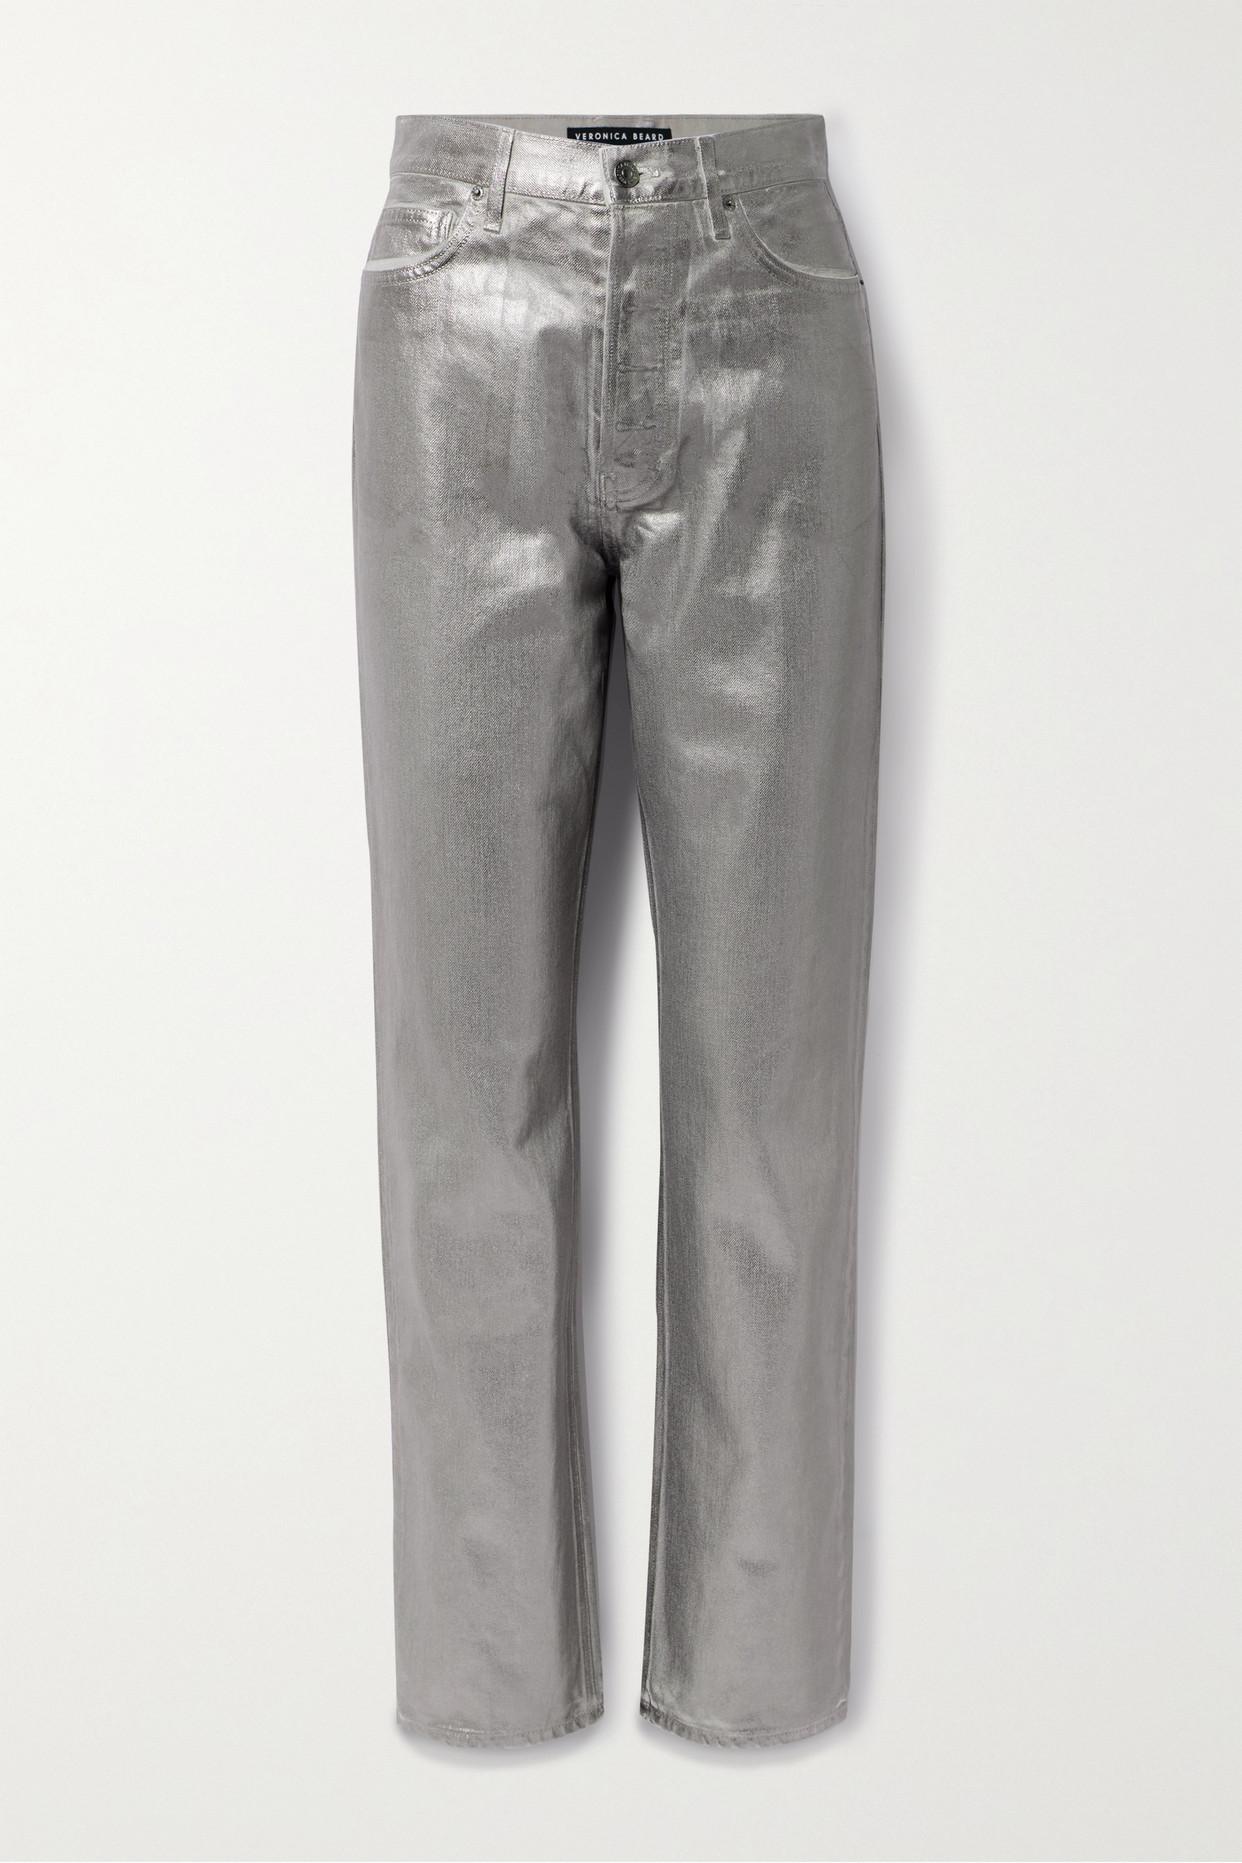 Acne Studios Relaxed Fit Coated Jeans - Farfetch